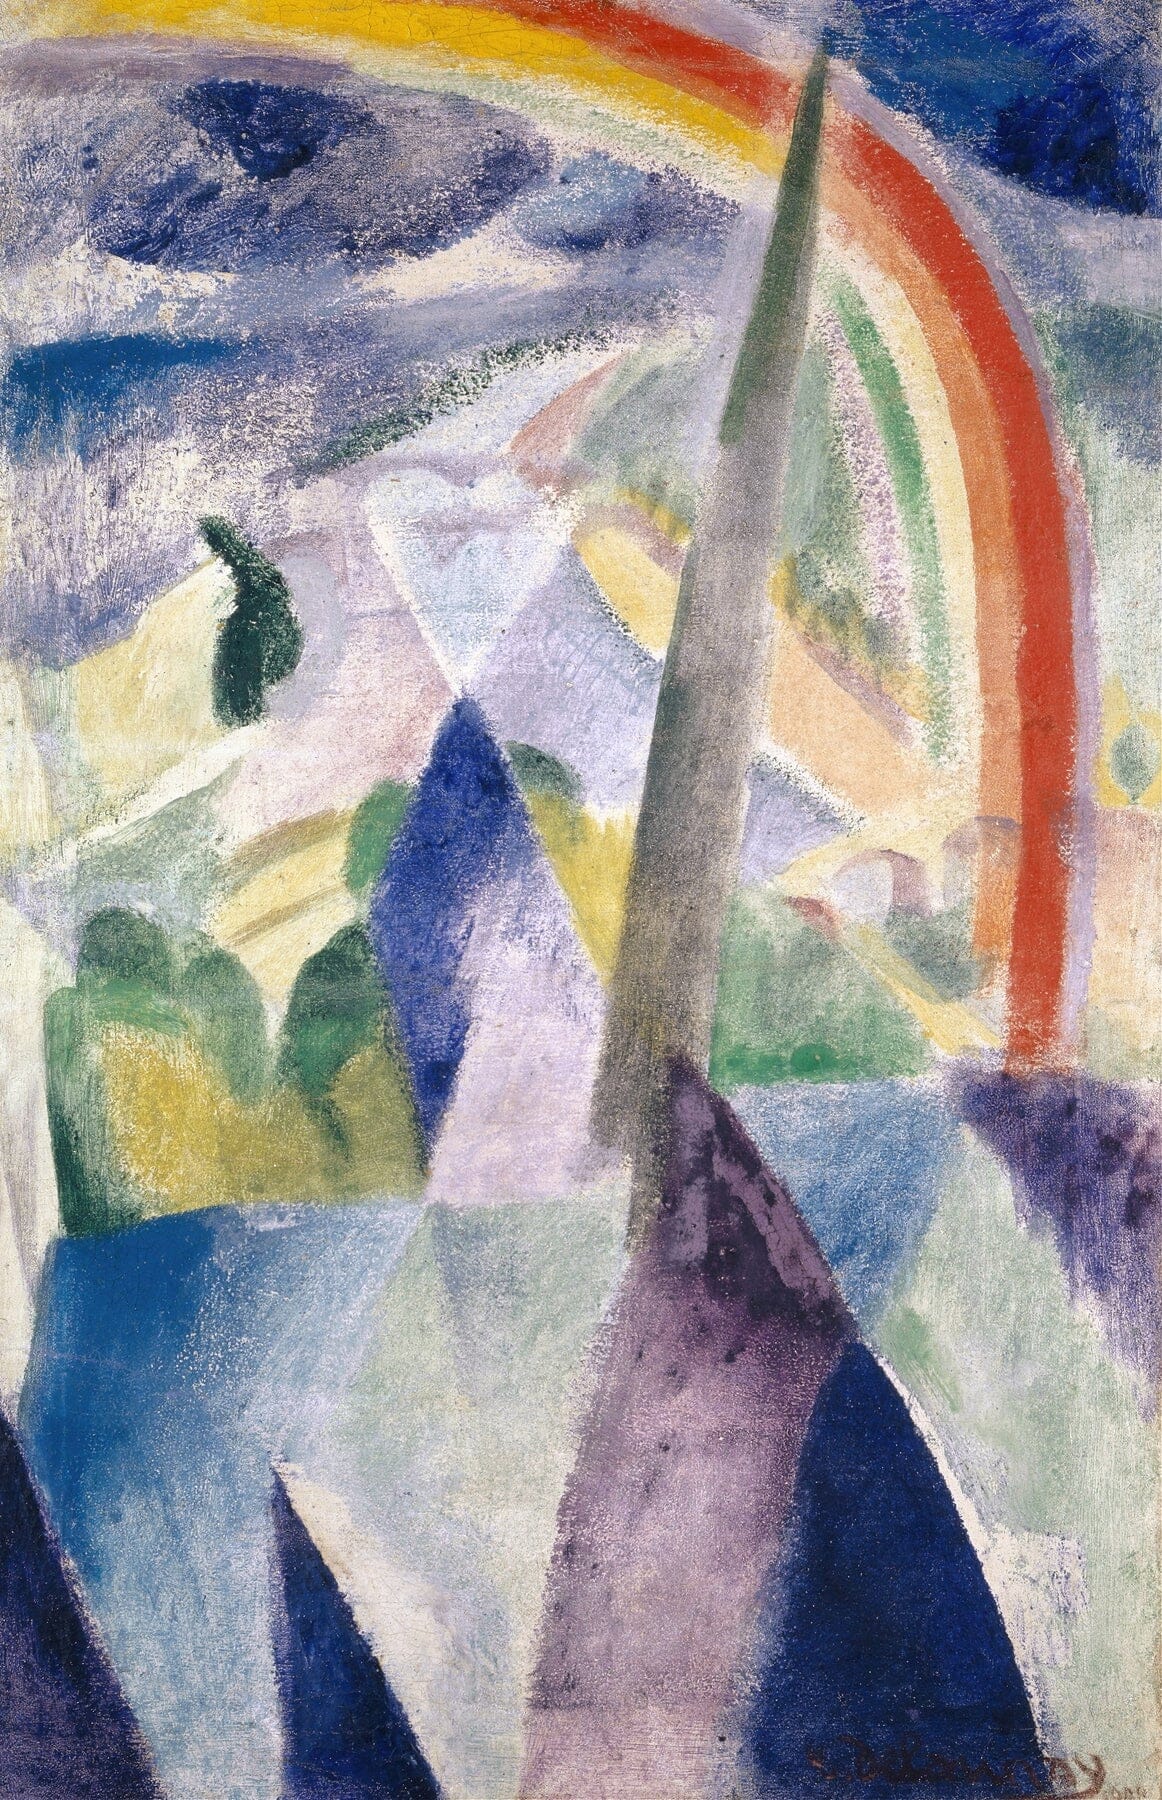 Spire of Notre Dame (1900s) | Abstract prints | Robert Delaunay Posters, Prints, & Visual Artwork The Trumpet Shop   